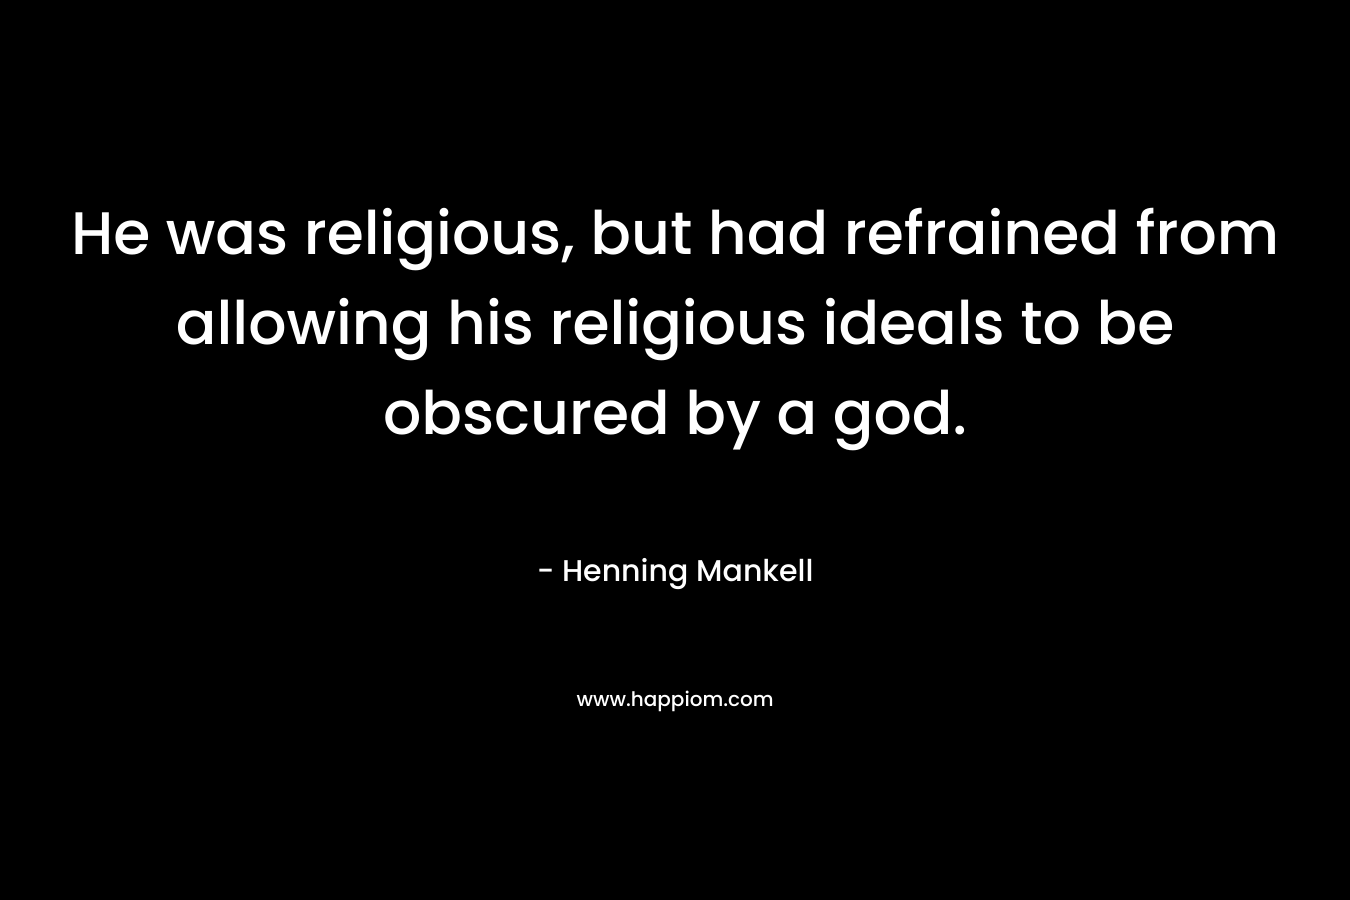 He was religious, but had refrained from allowing his religious ideals to be obscured by a god.